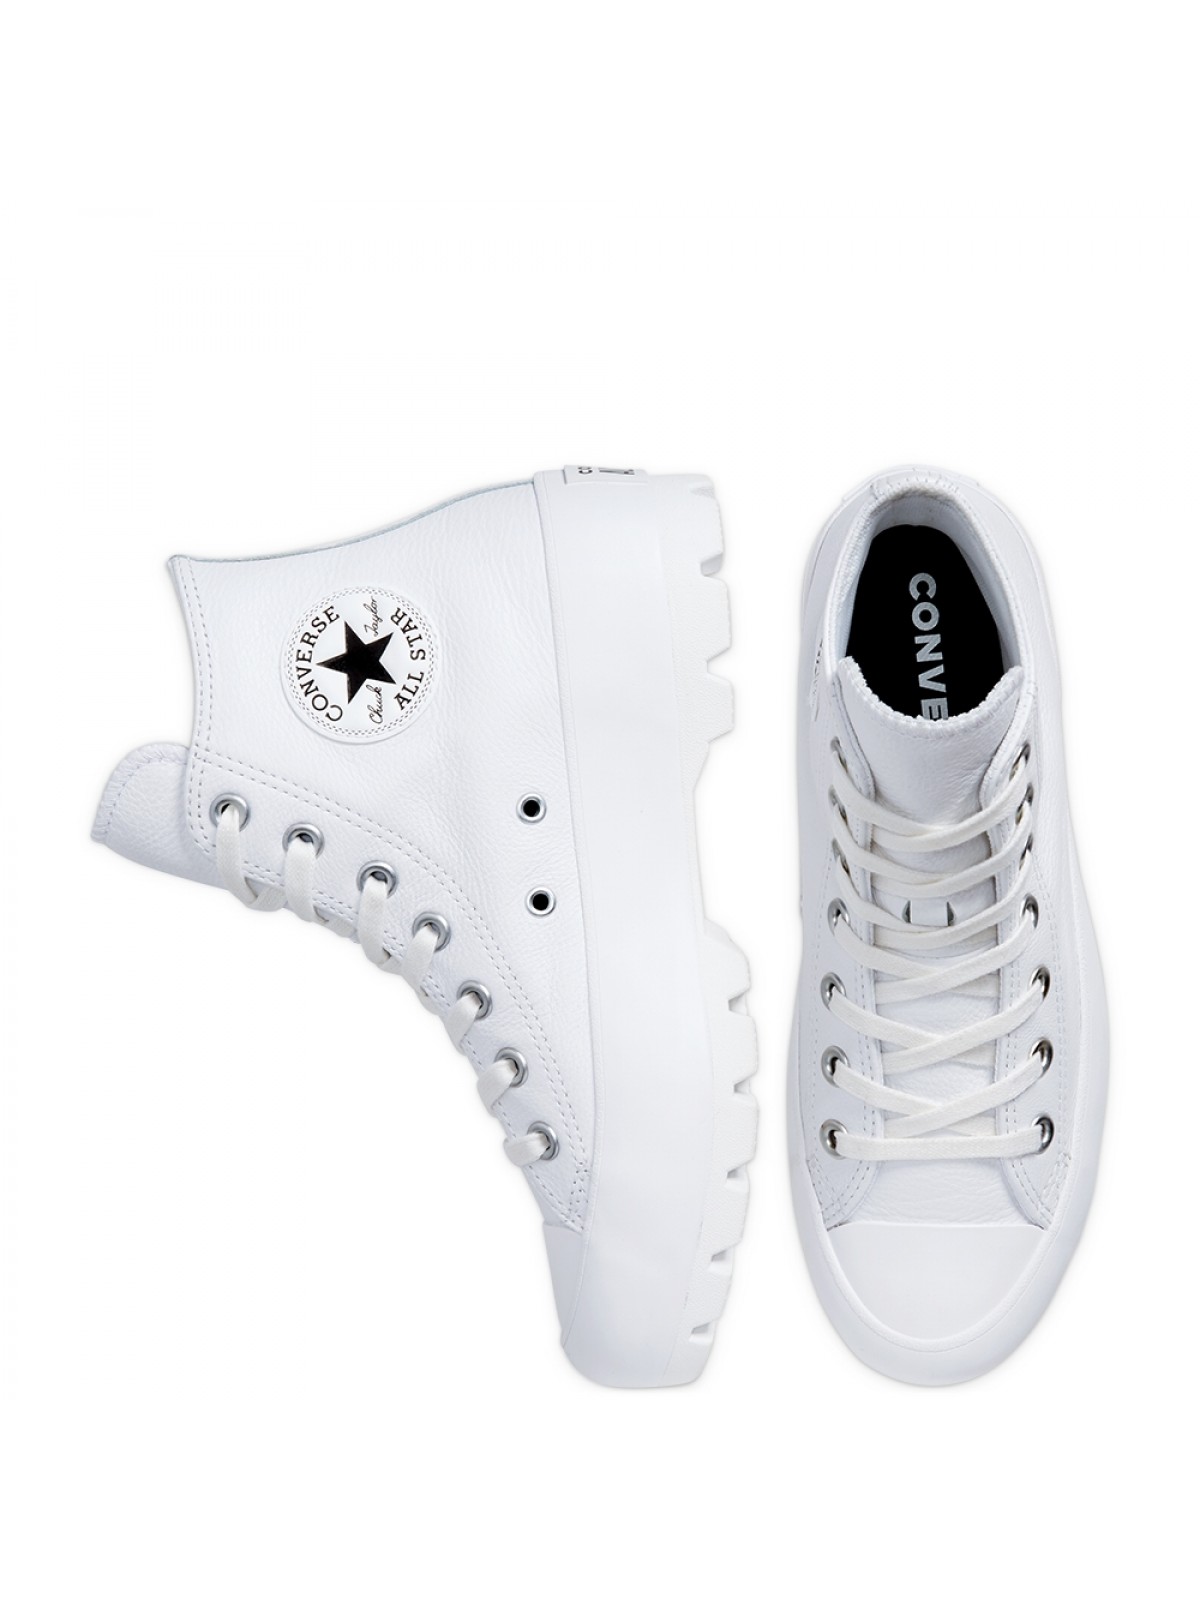 converses blanches cuir cheap buy online